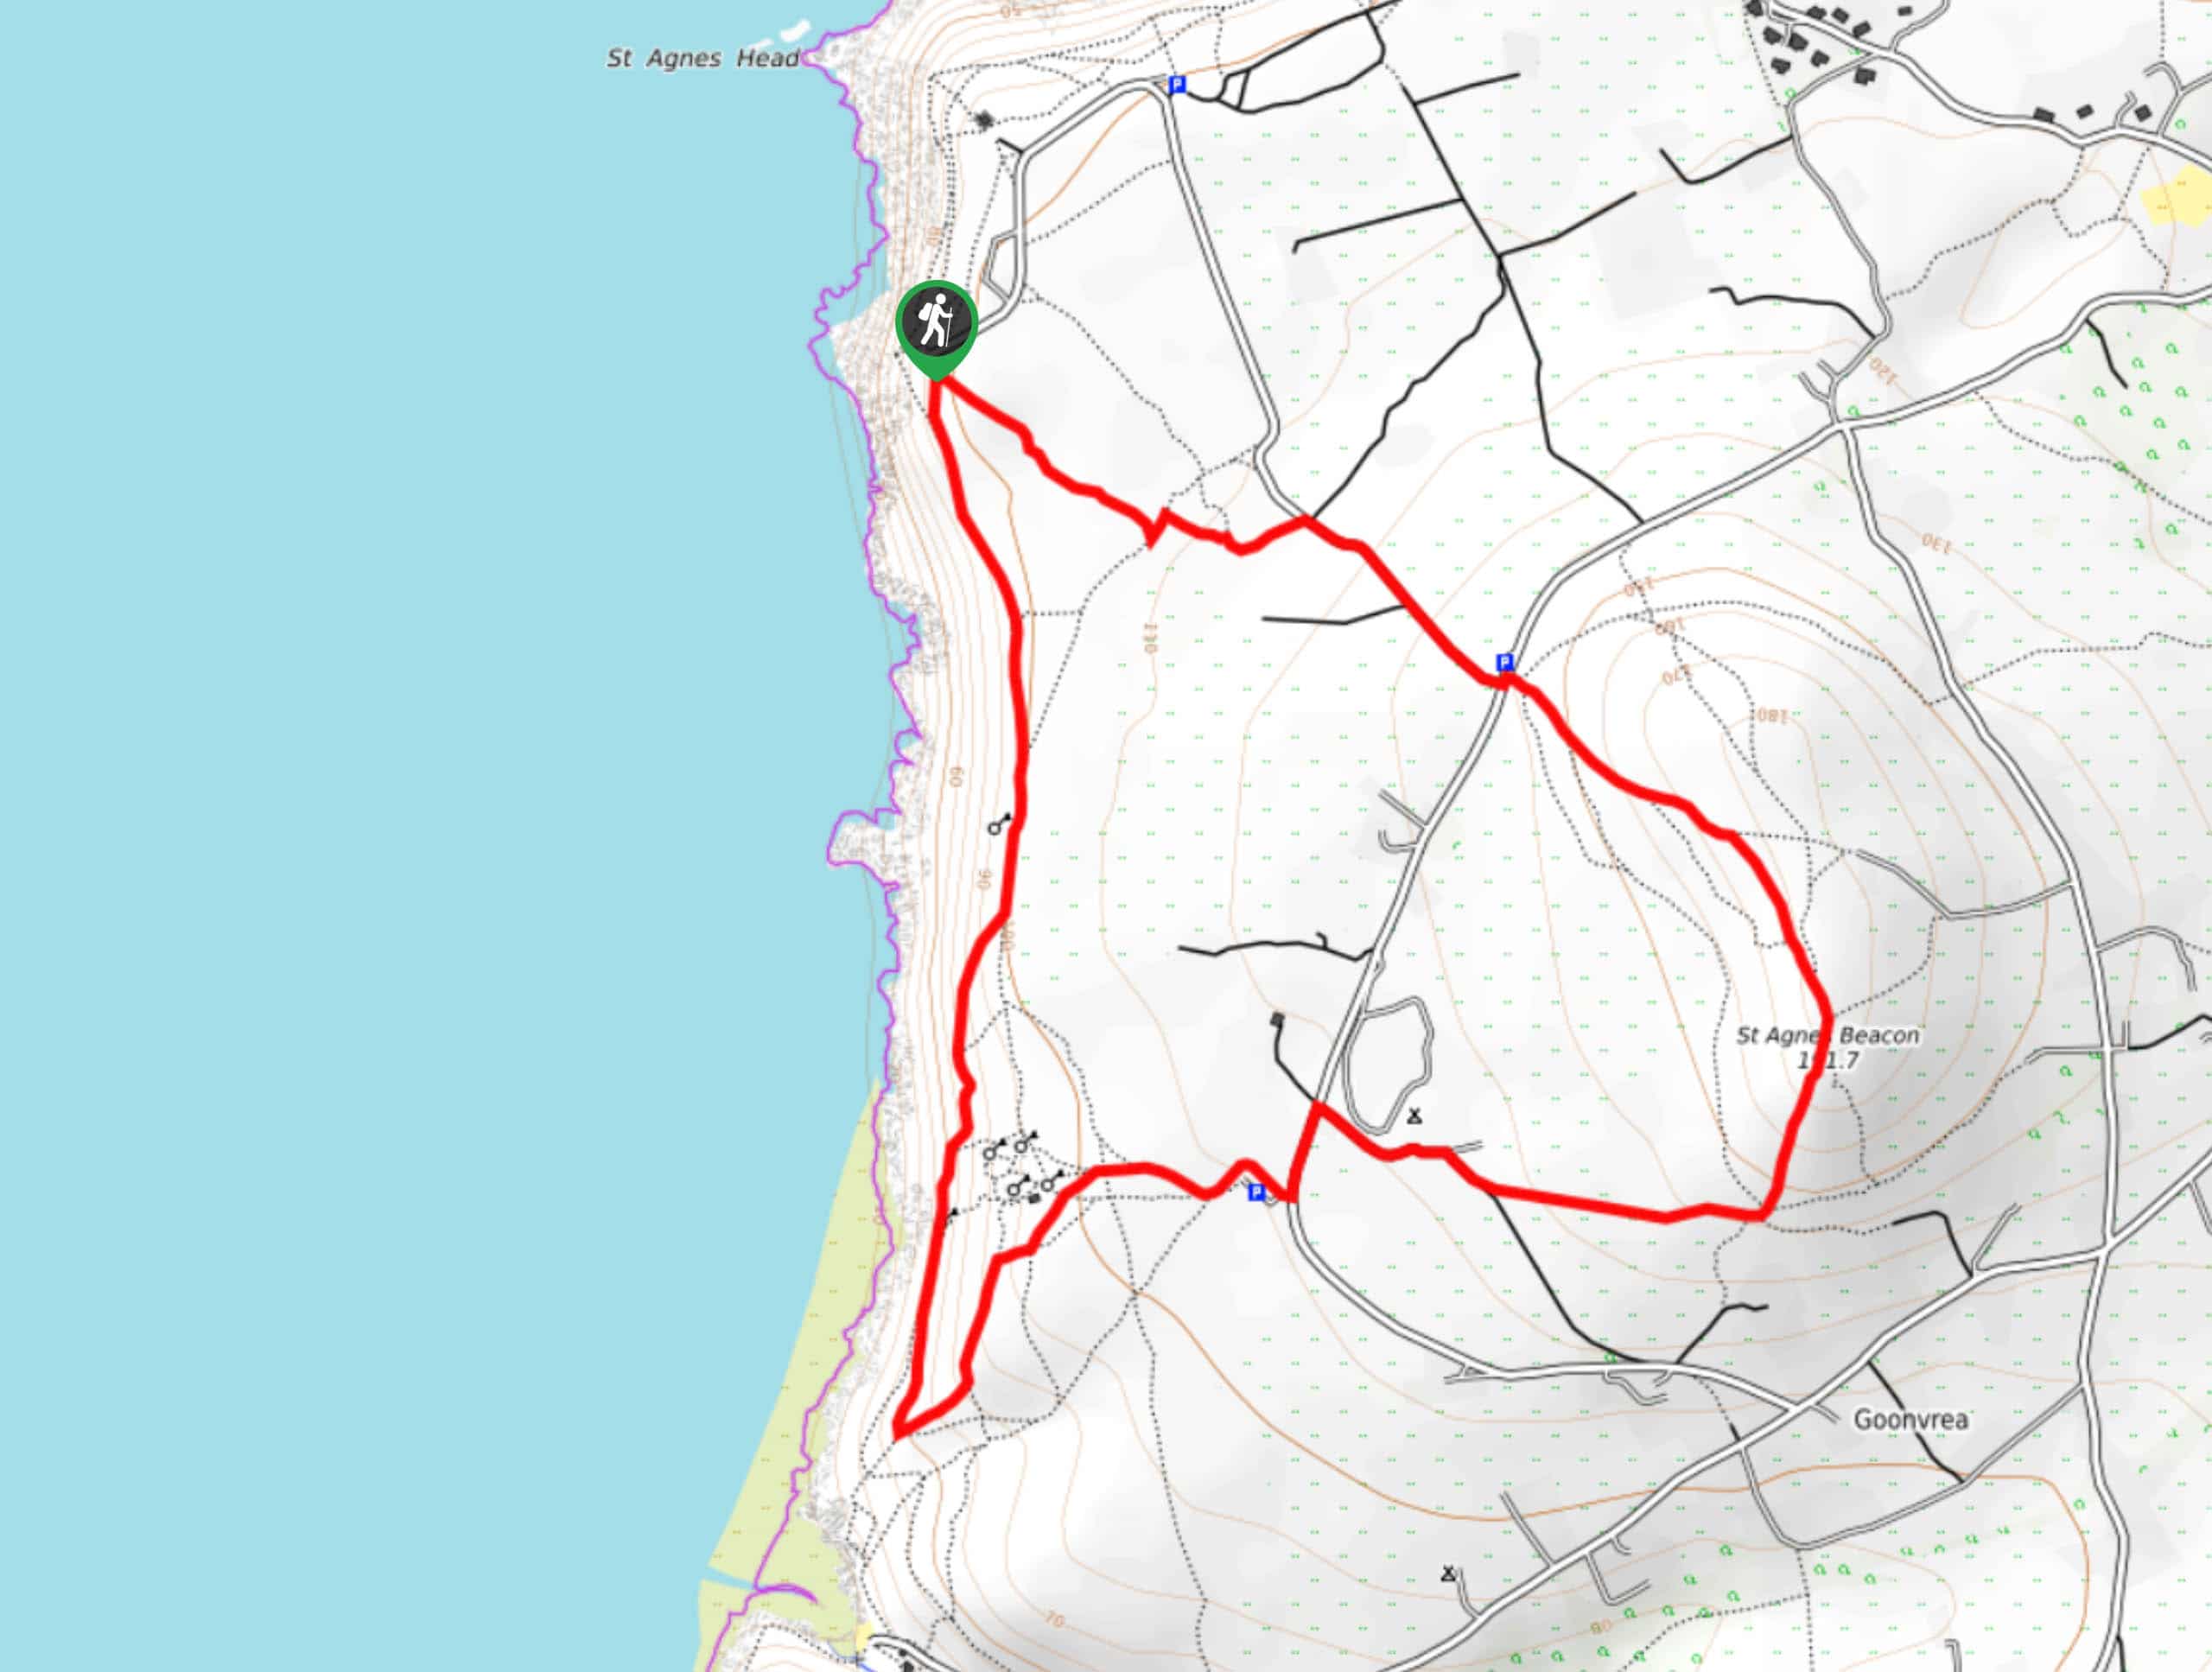 St Agnes Beacon and Wheal Coates Walk Map